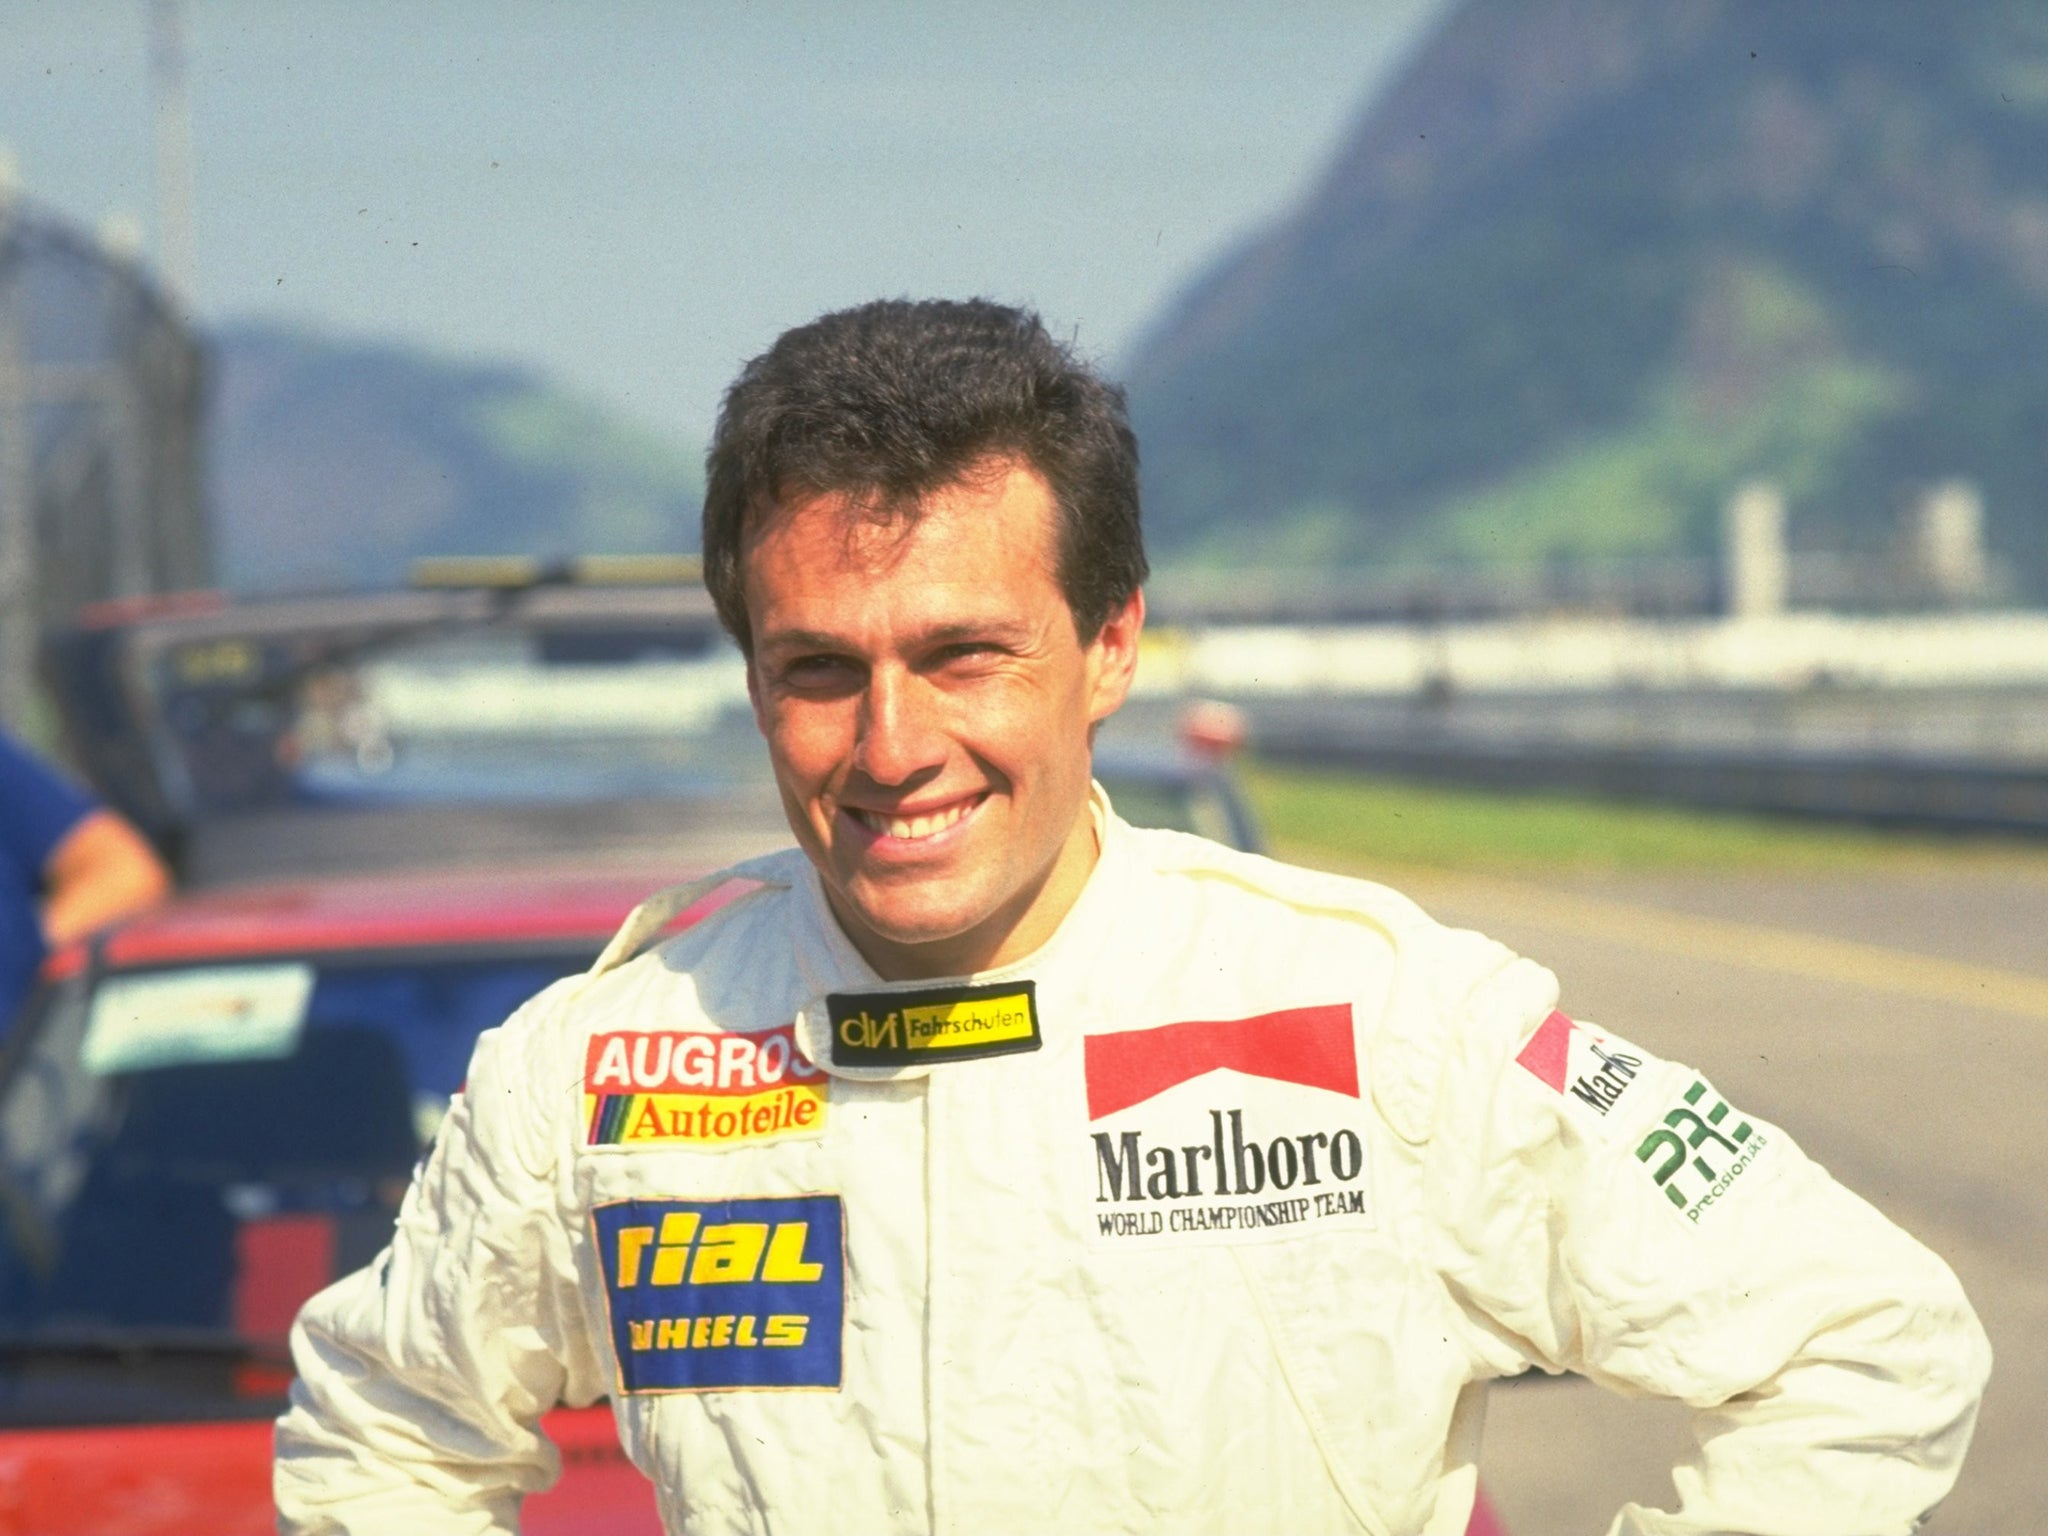 De Cesaris in 1988; he was able to enjoy a long career
thanks to funding from Marlboro